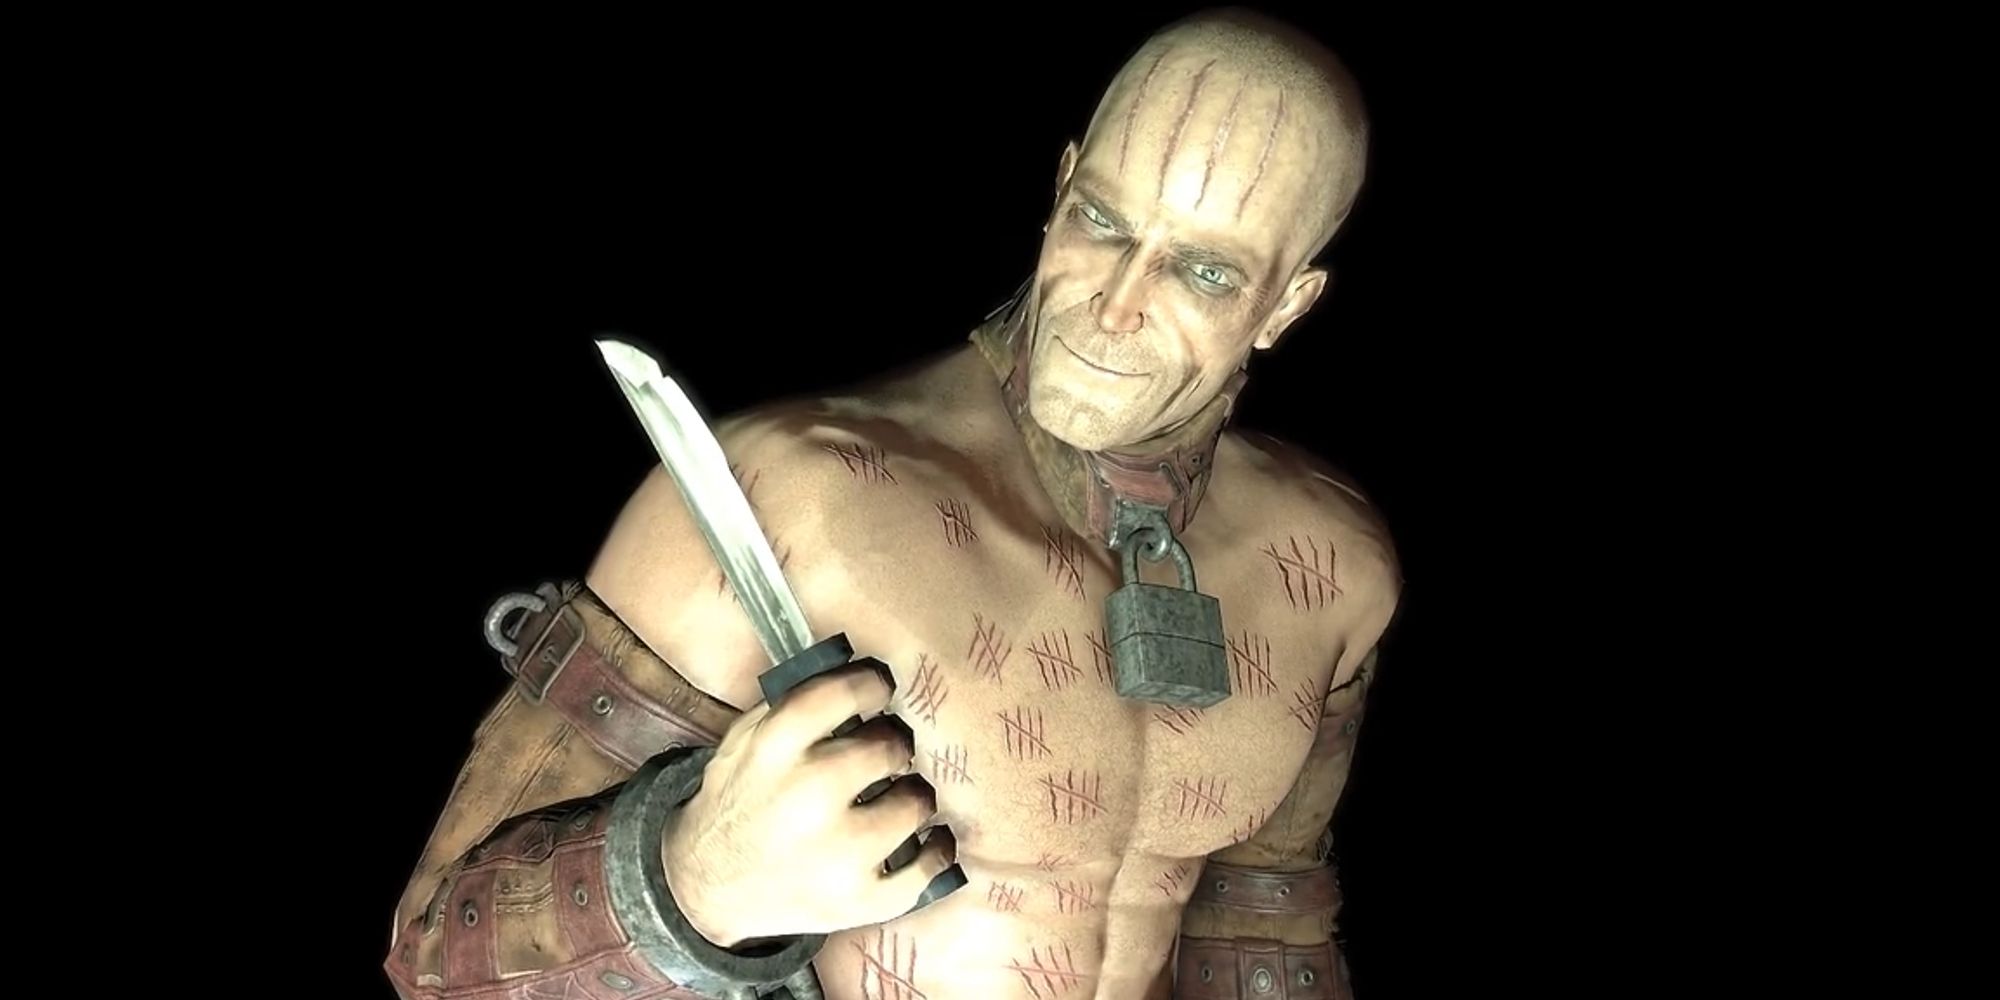 Victor Zsasz taunting Batmans dead body in game over screen for Batman Arkham City